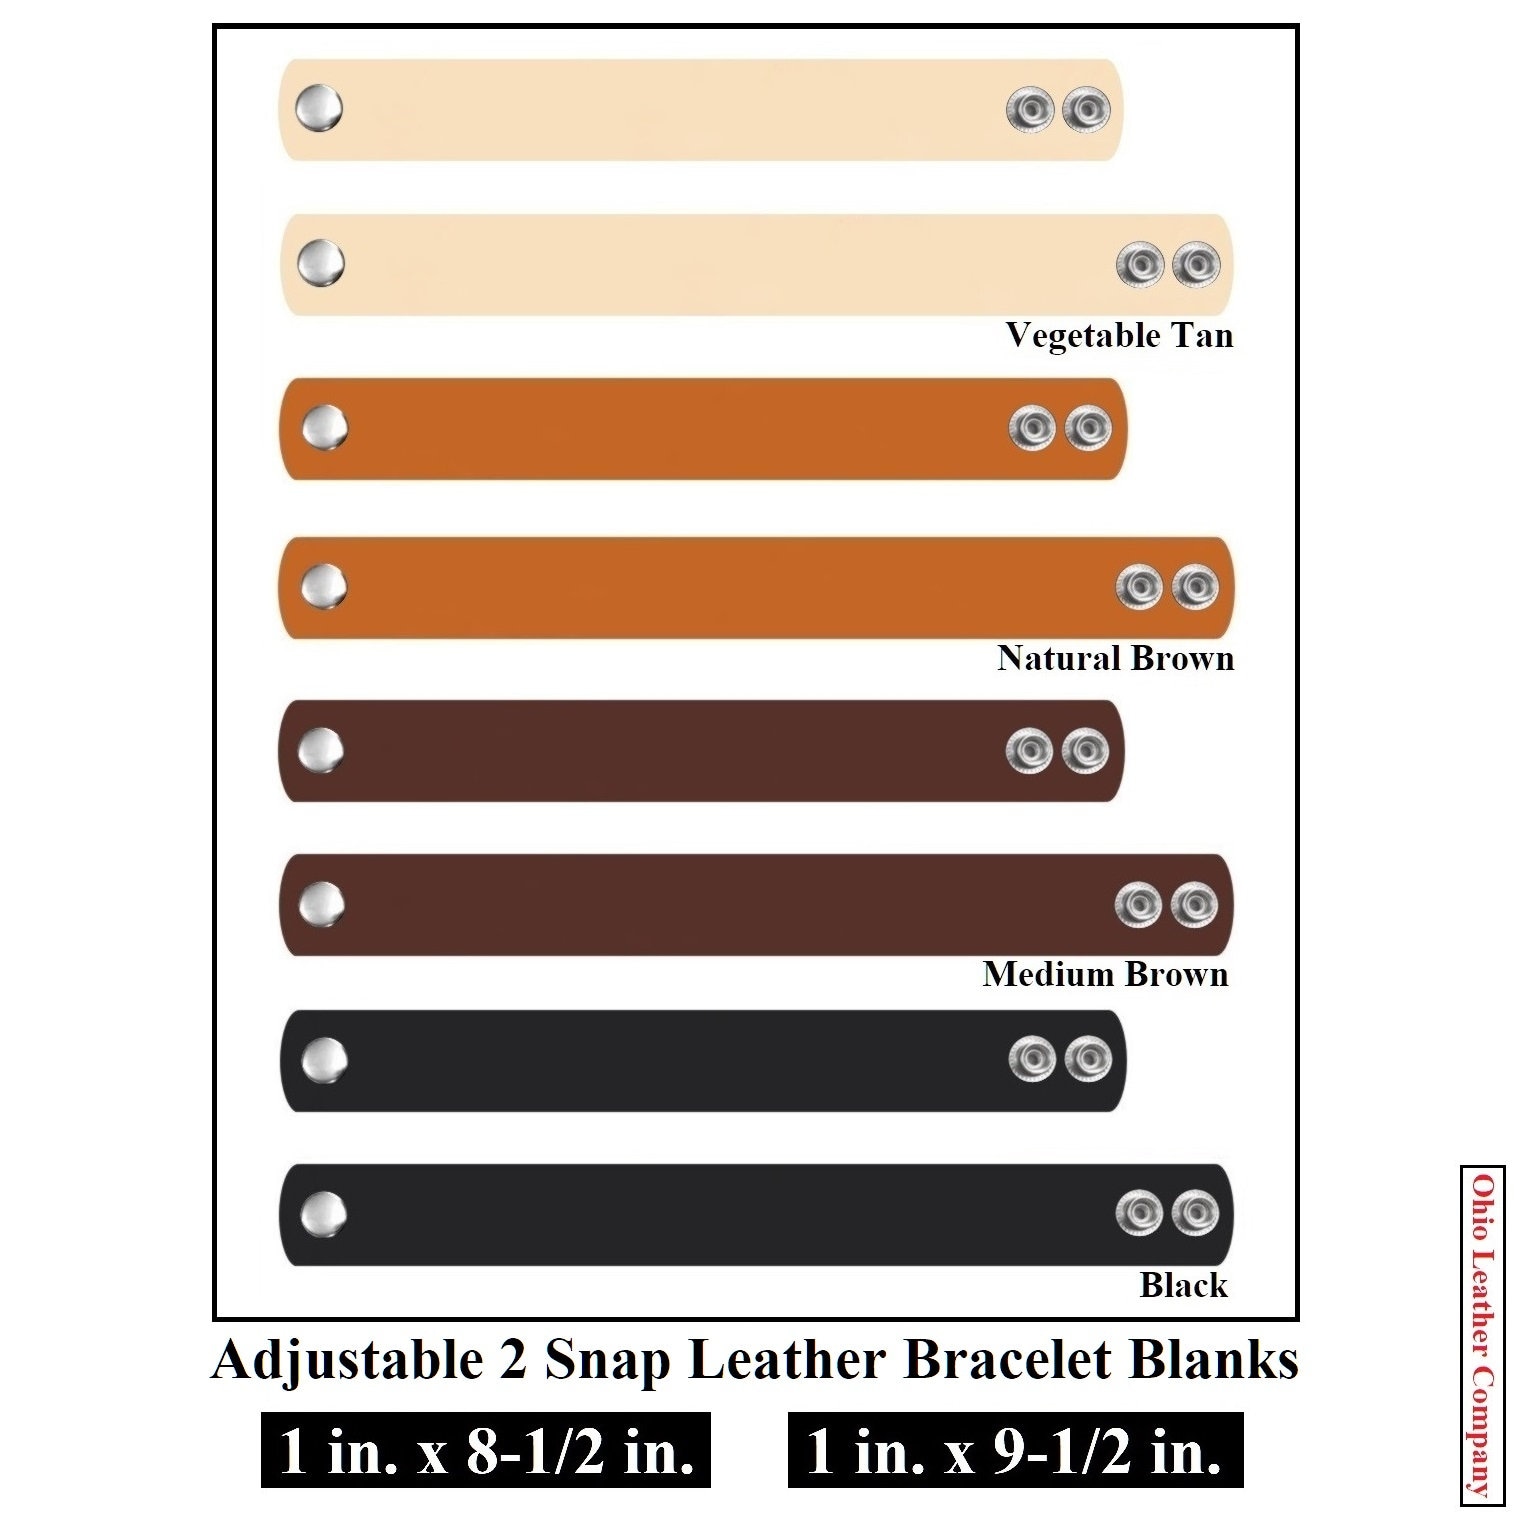 Leather bracelet blanks 15 Pack 8 oz Medium Brown 1 inch X 7 to 11 inch 